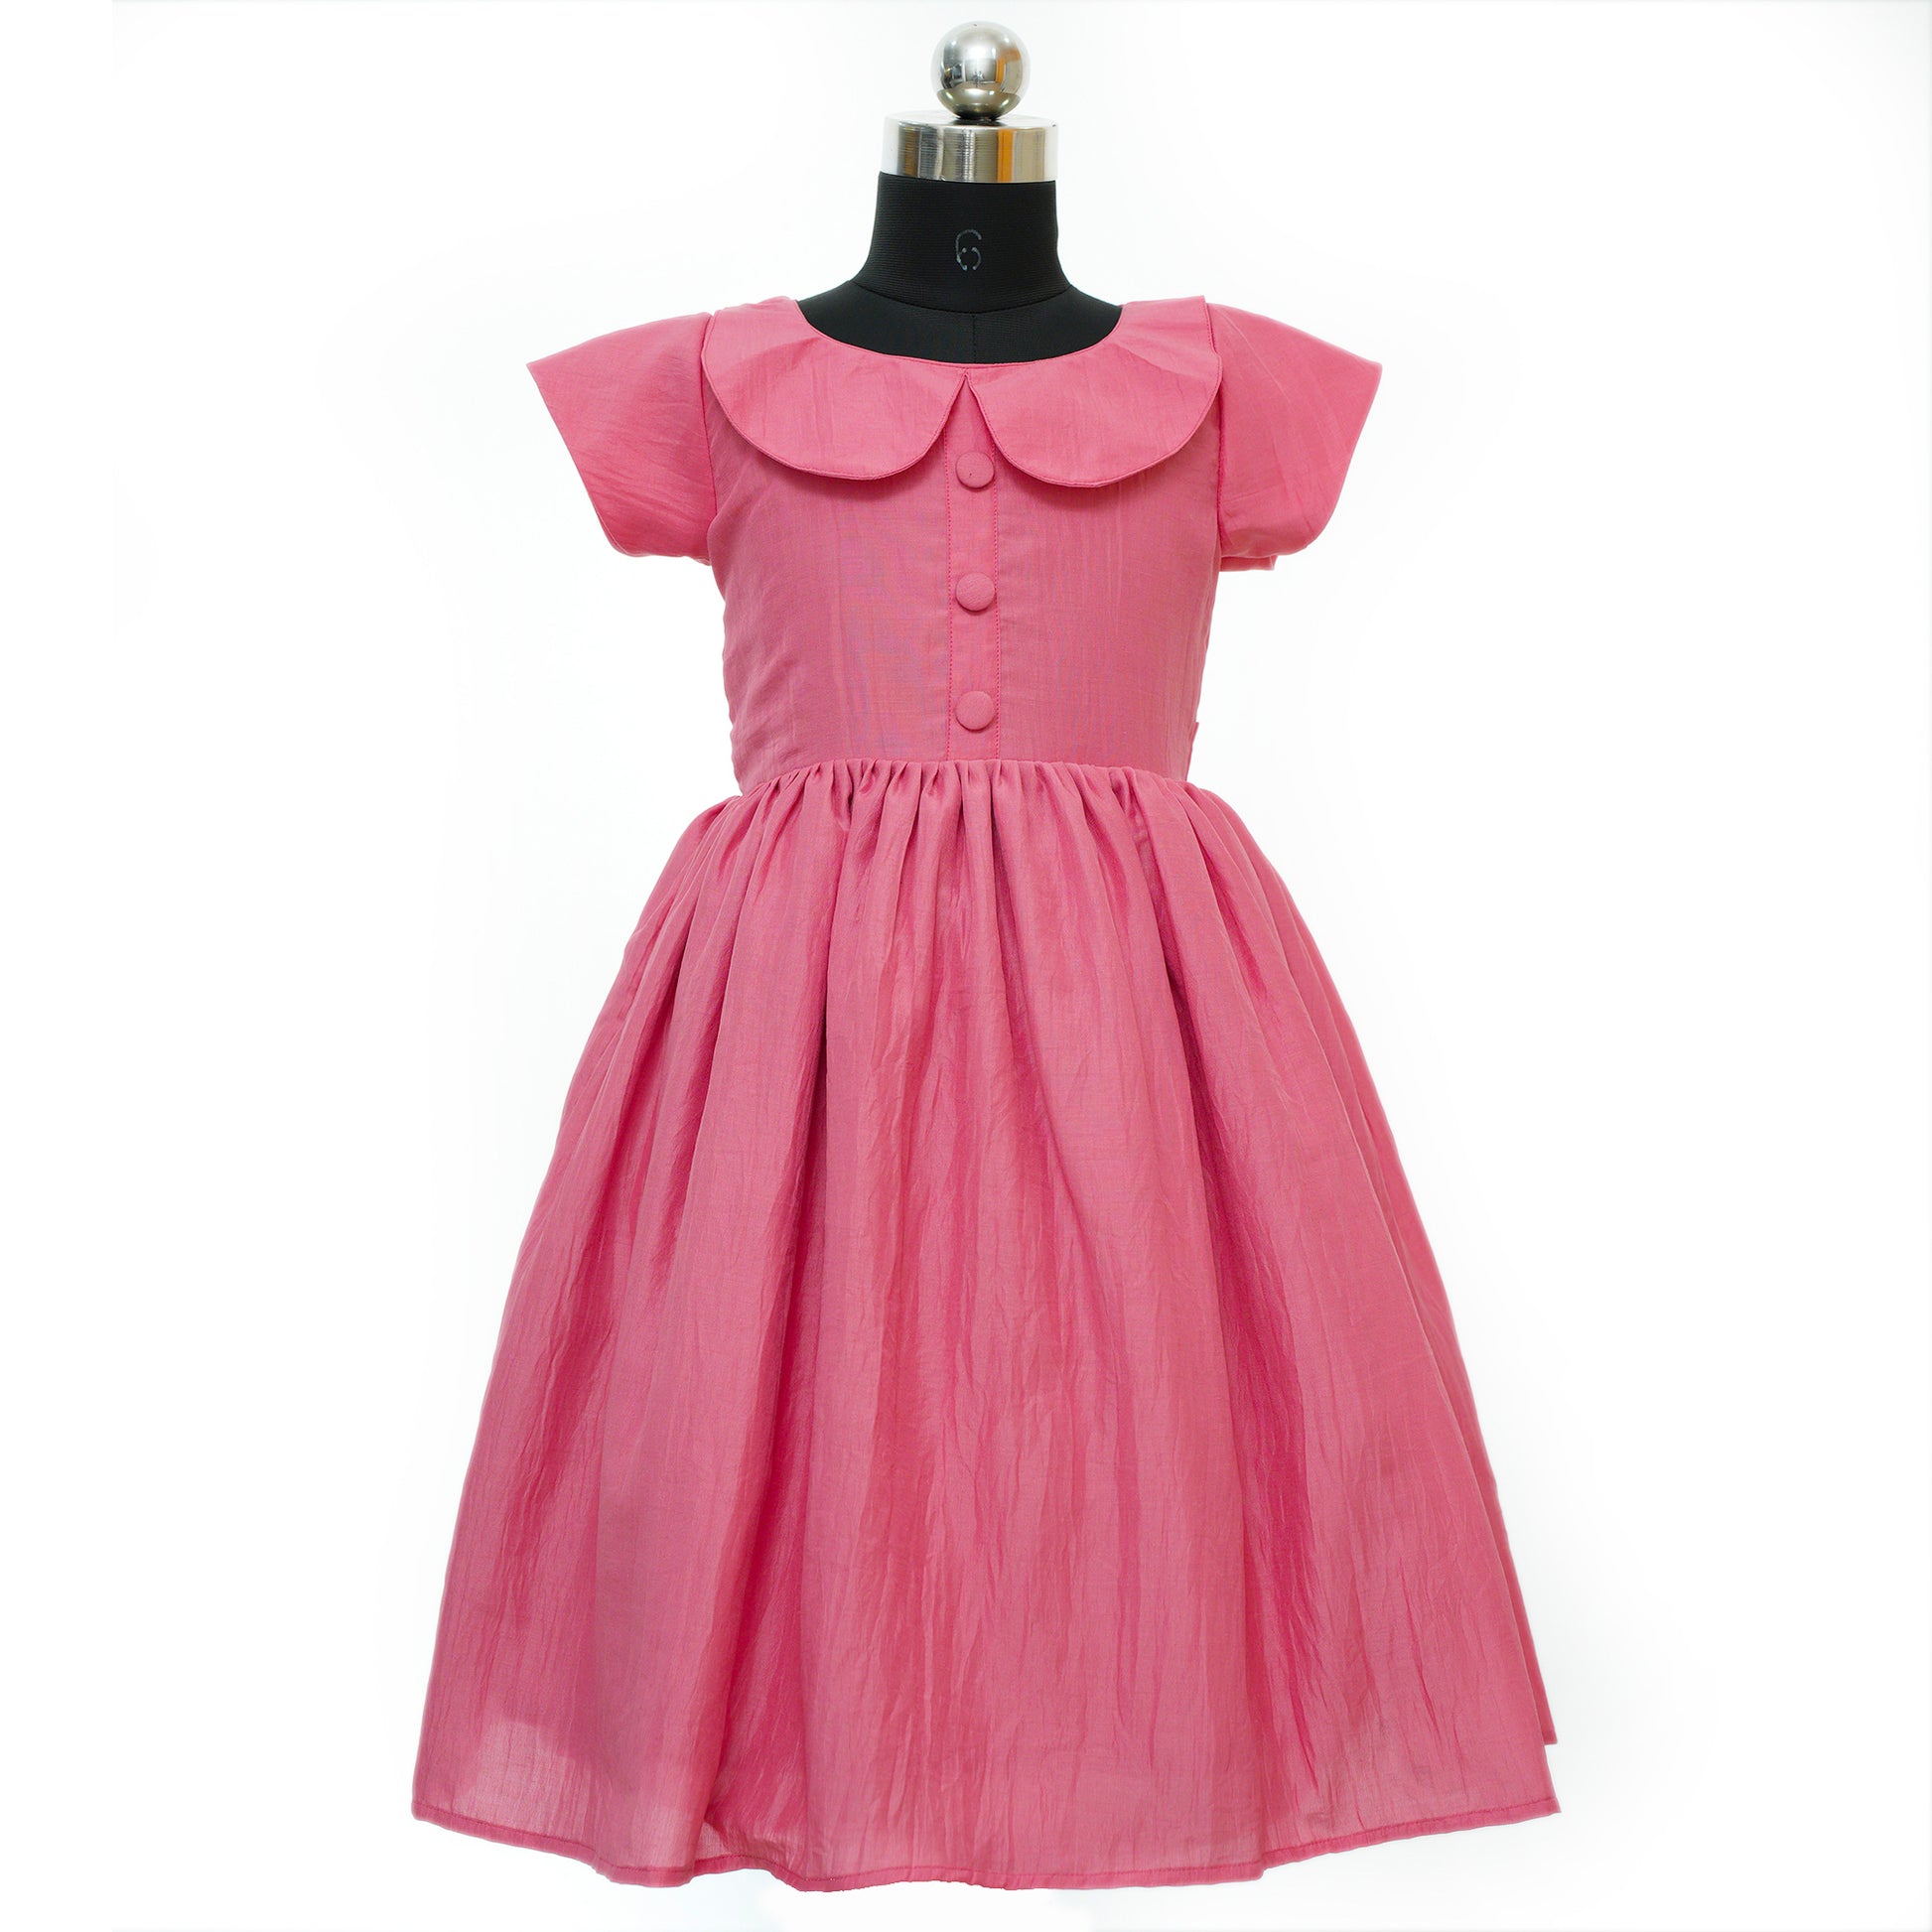 HEYKIDOO Unique designer dresses girls western dresses for party kids customised frocks childrens clothing  birthday frocks online comfortable baby girl dresses 2023 kids clothing stores online India